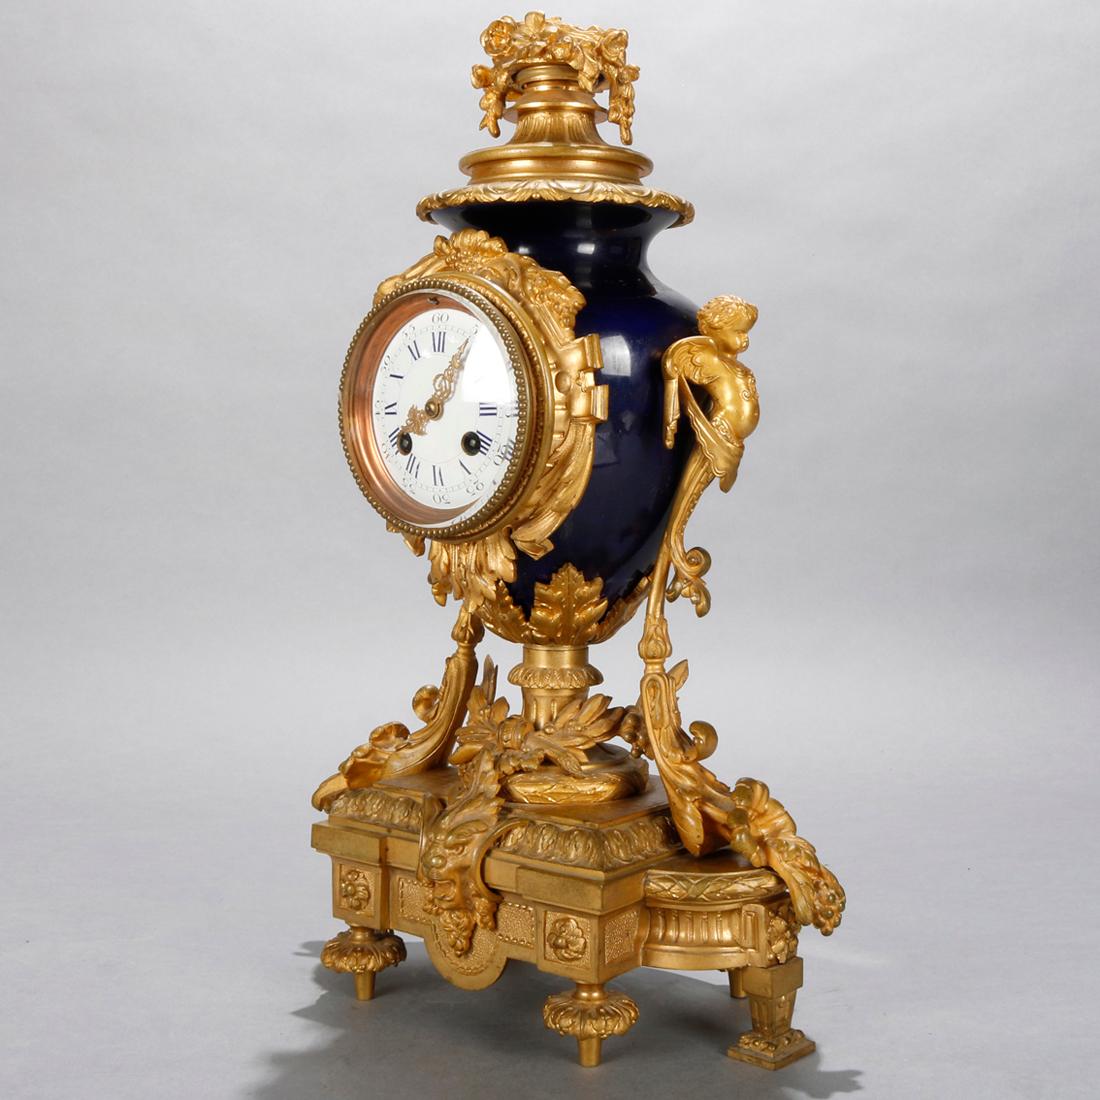 An antique French Louis XIV mantel clock offers gilt bronze and porcelain construction with cobalt blue case having foliate crest, flanking cherub handles, acanthus and foliate elements, seated on base with central lion head mask and raised on